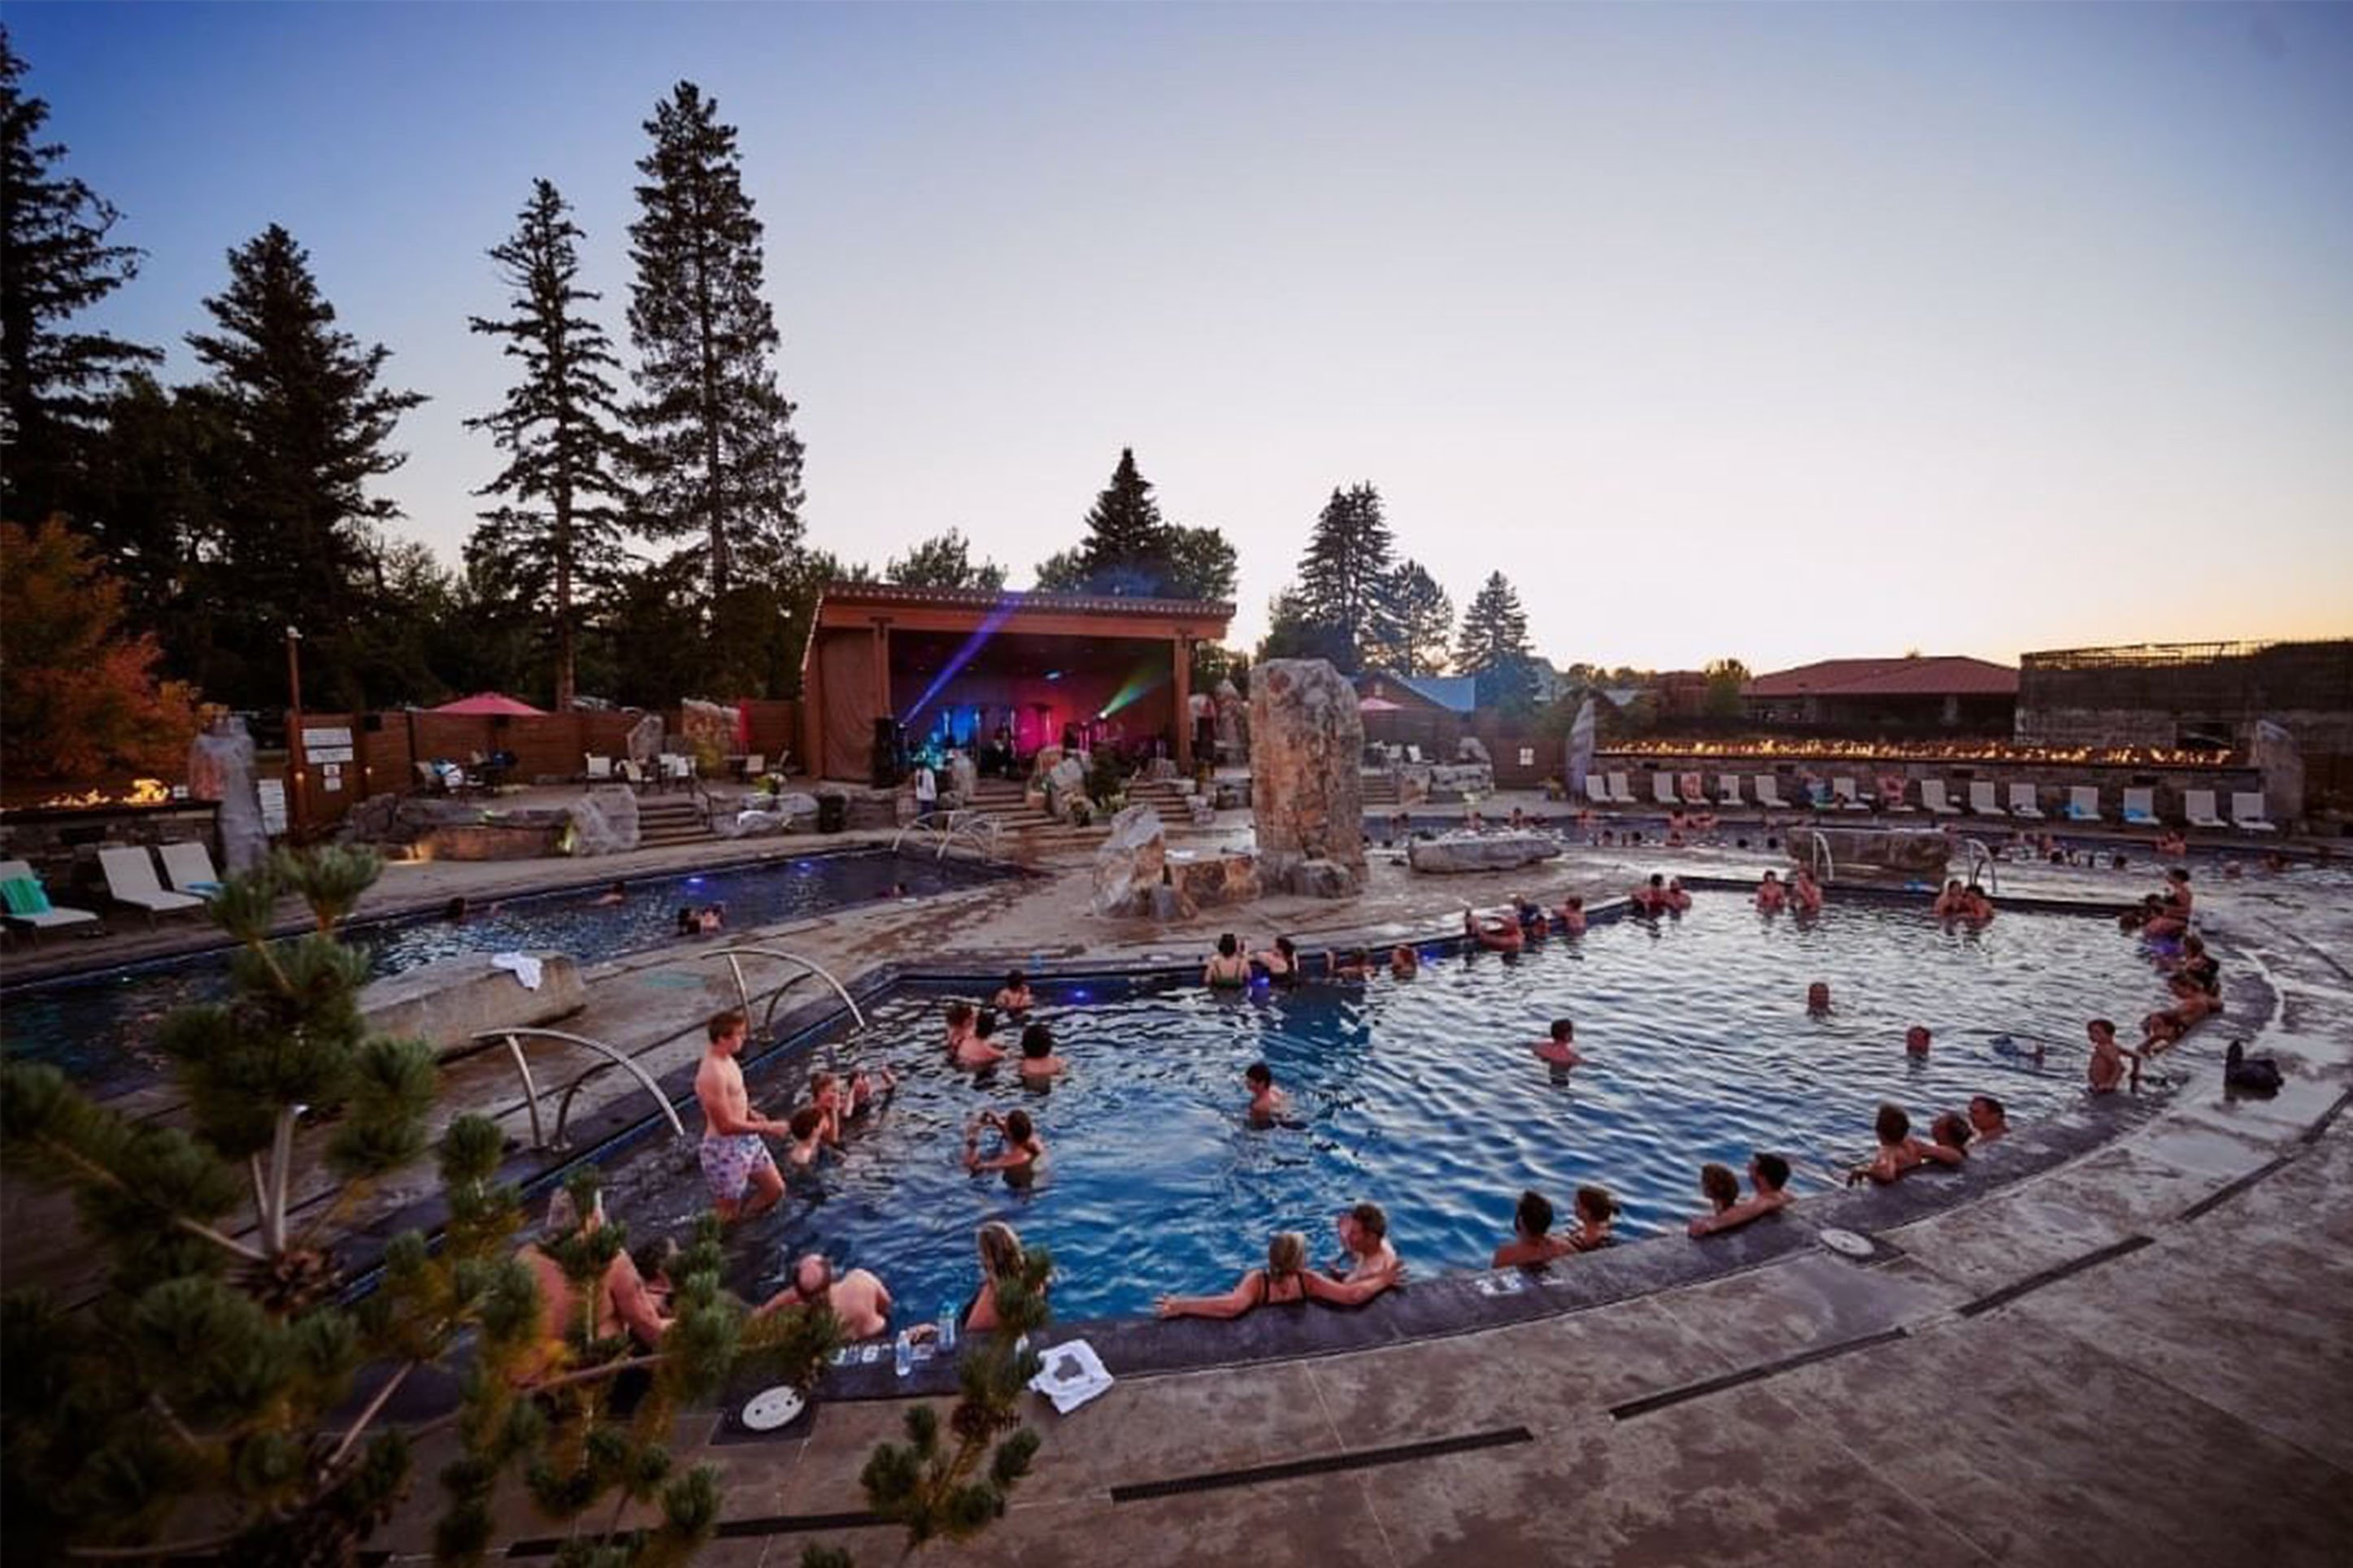 The Best Hot Springs in Montana